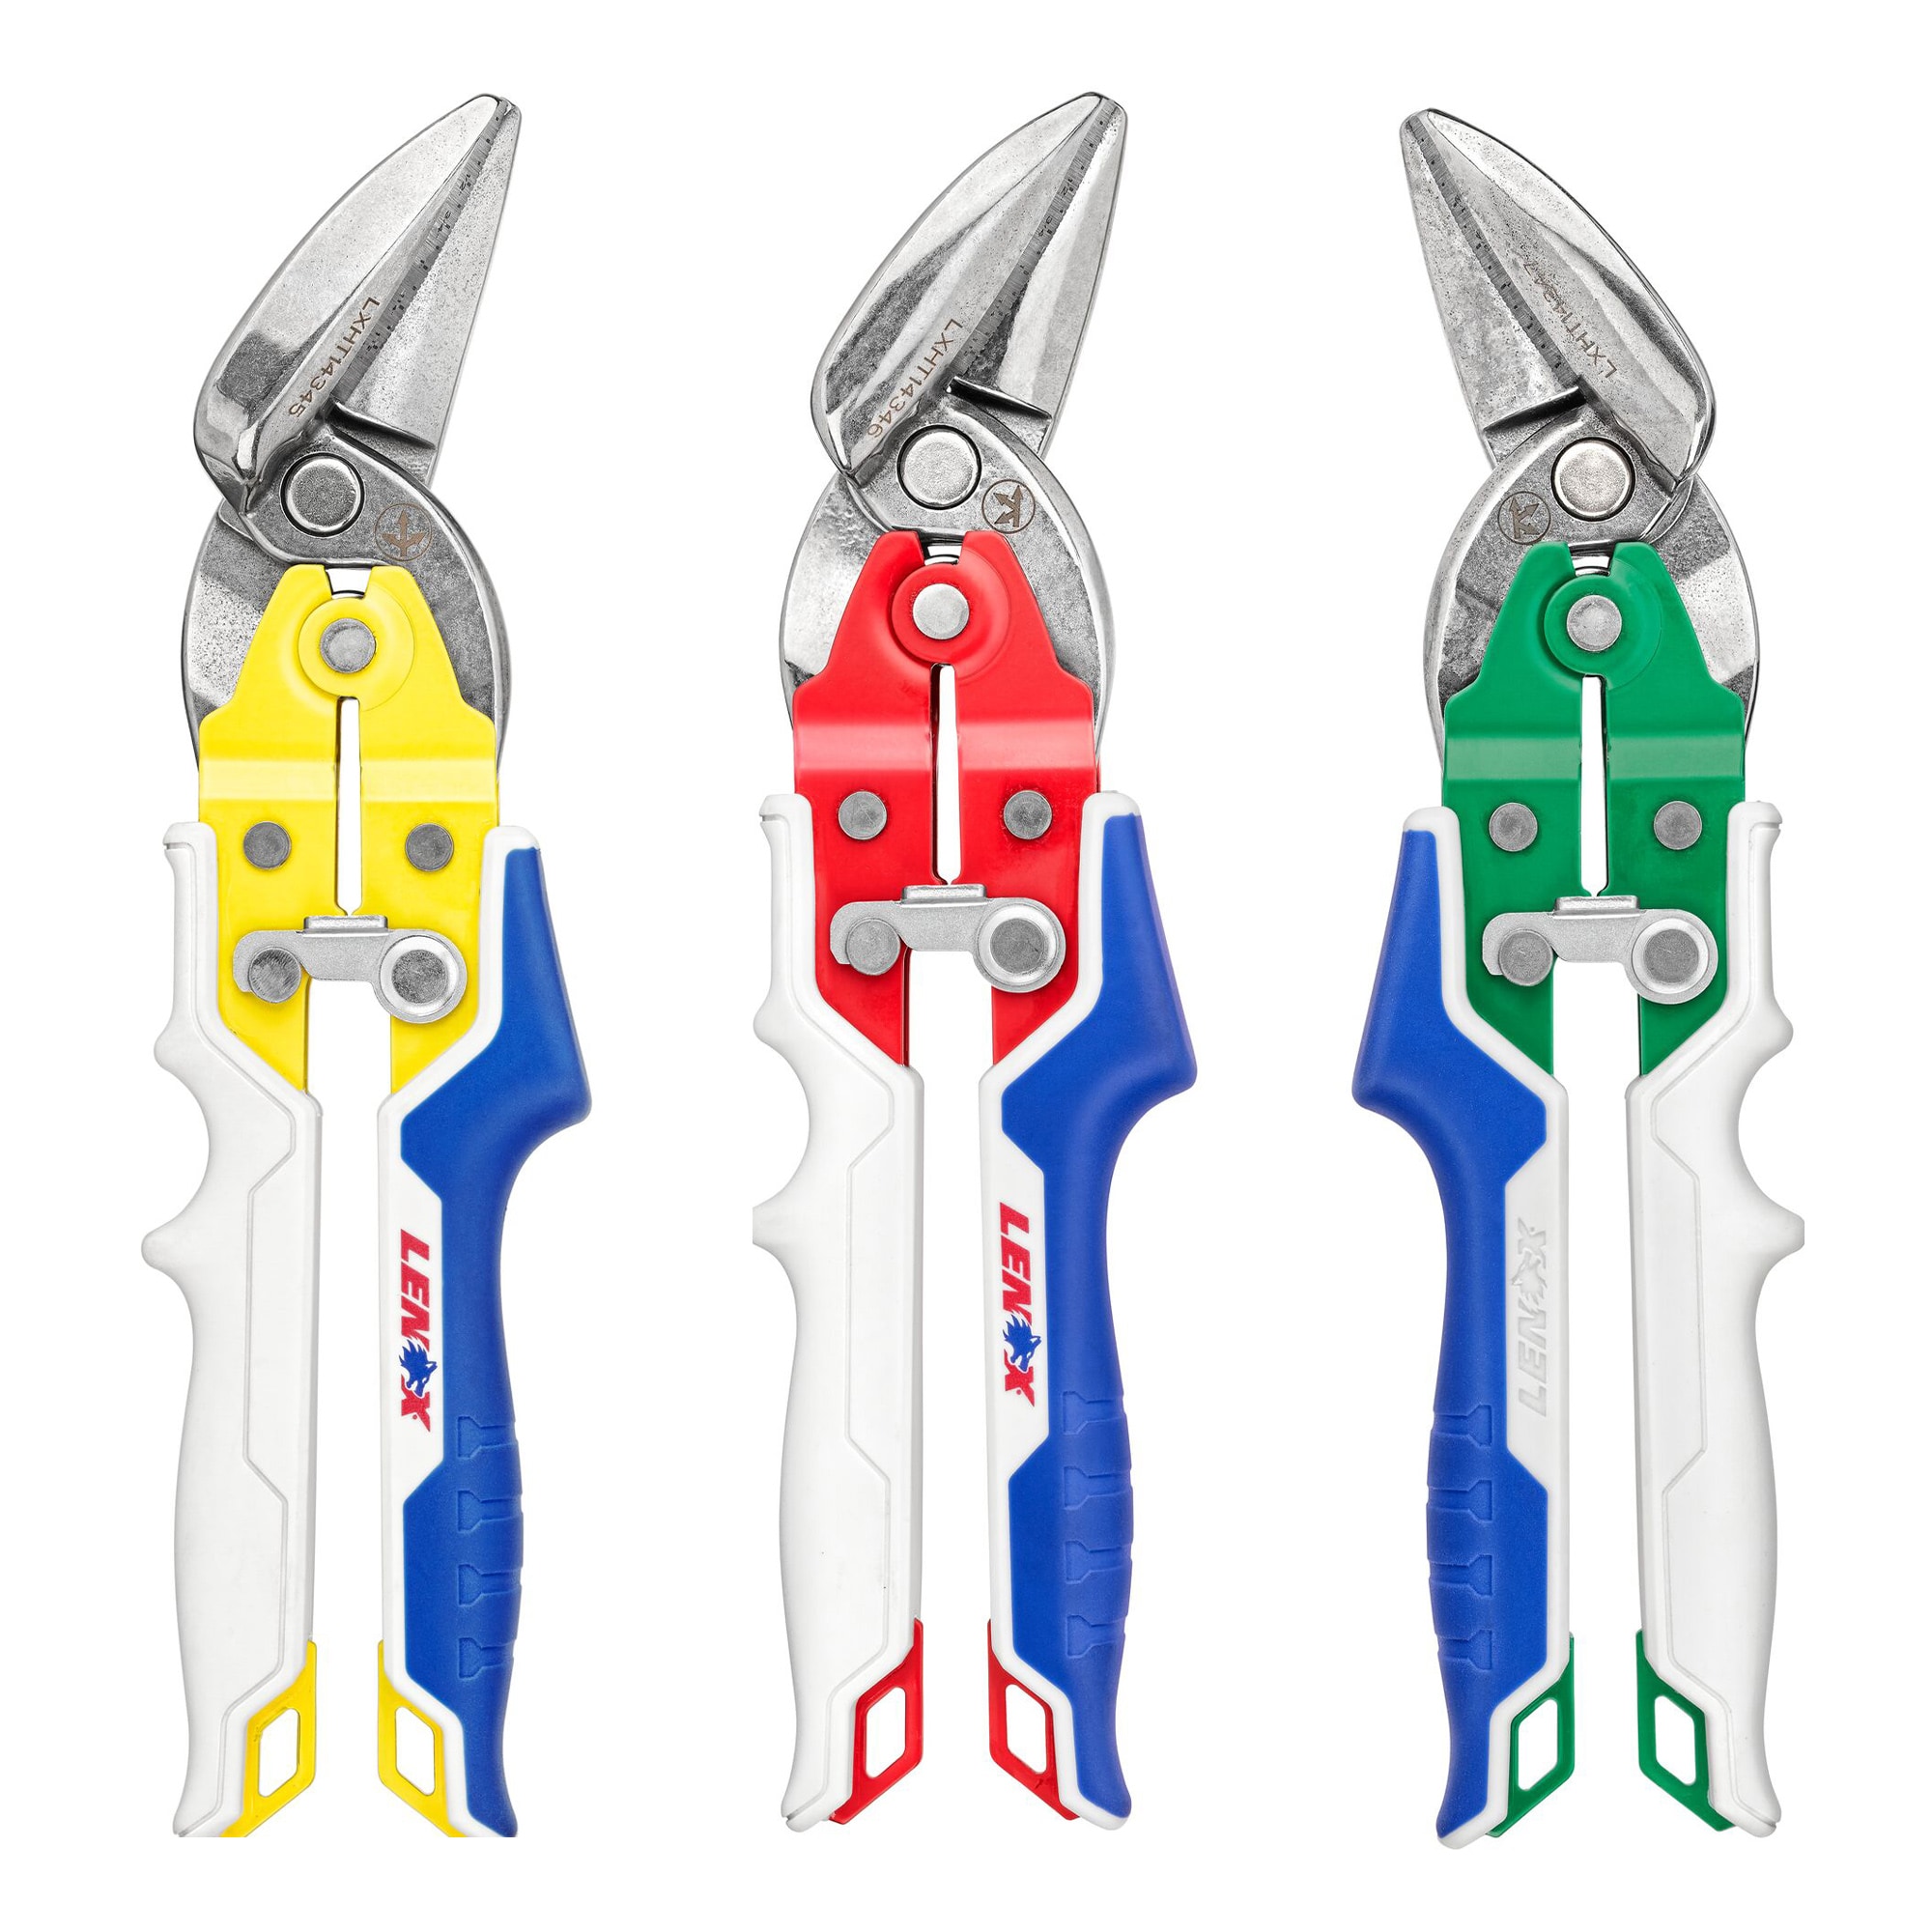 LENOX Lenox 3-pack Forged Steel Offset Snips (Straight, Left & Right)